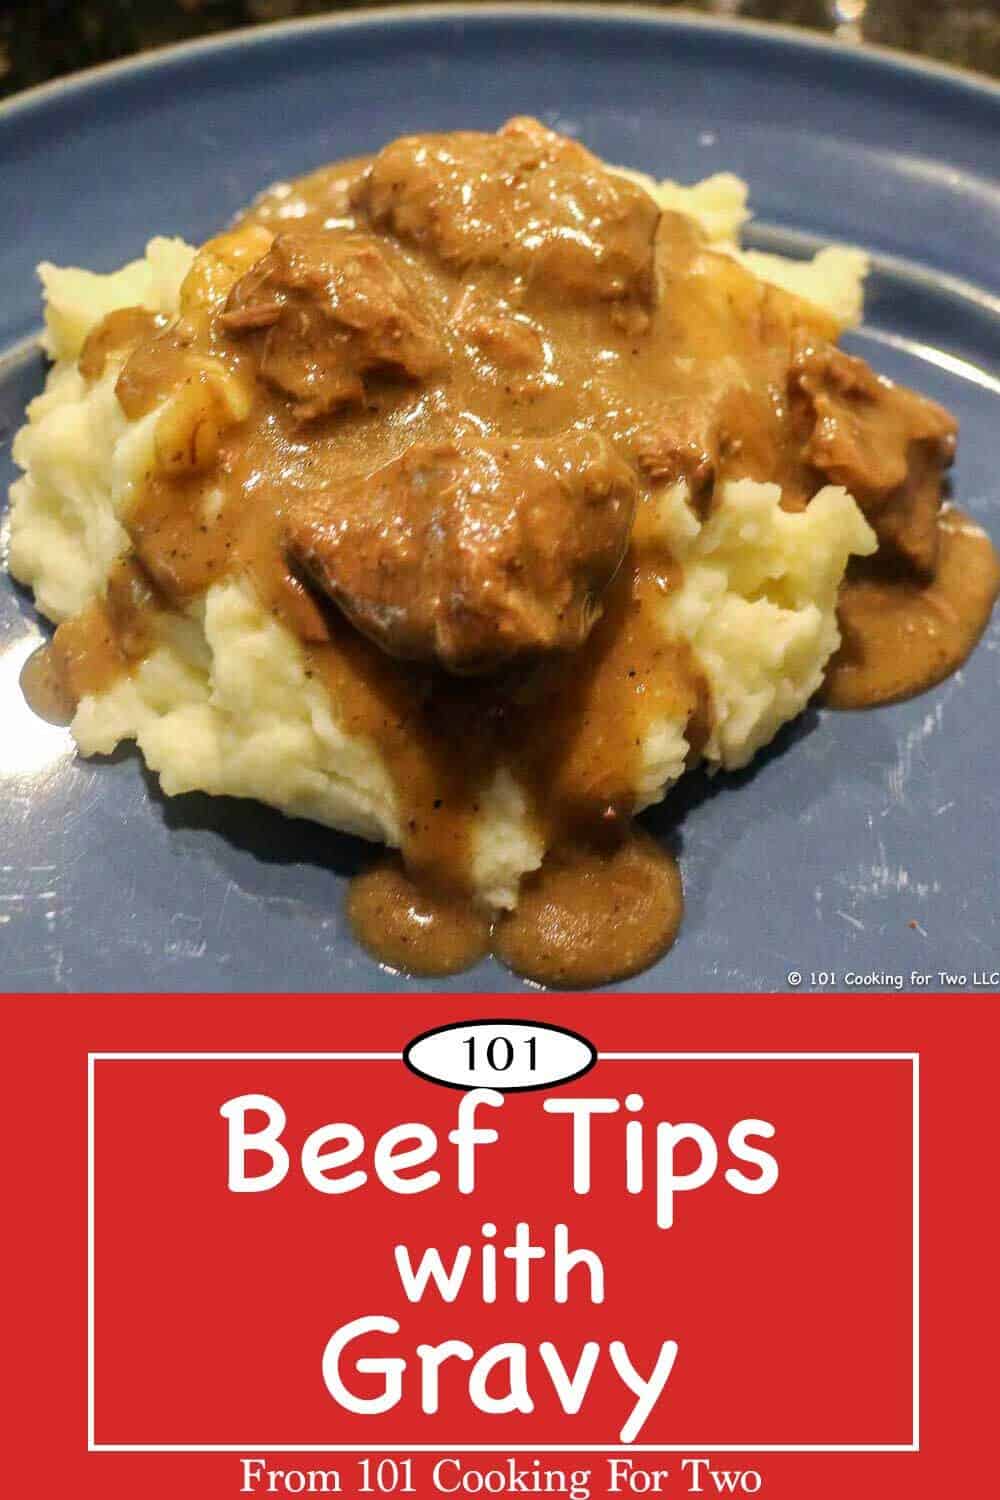 Step by step photo instructions for excellent one pan beef tips with gravy. Guaranteed to become part of your comfort food rotation.  #BeefTipsAndGravy #SirloinTipAndGravy